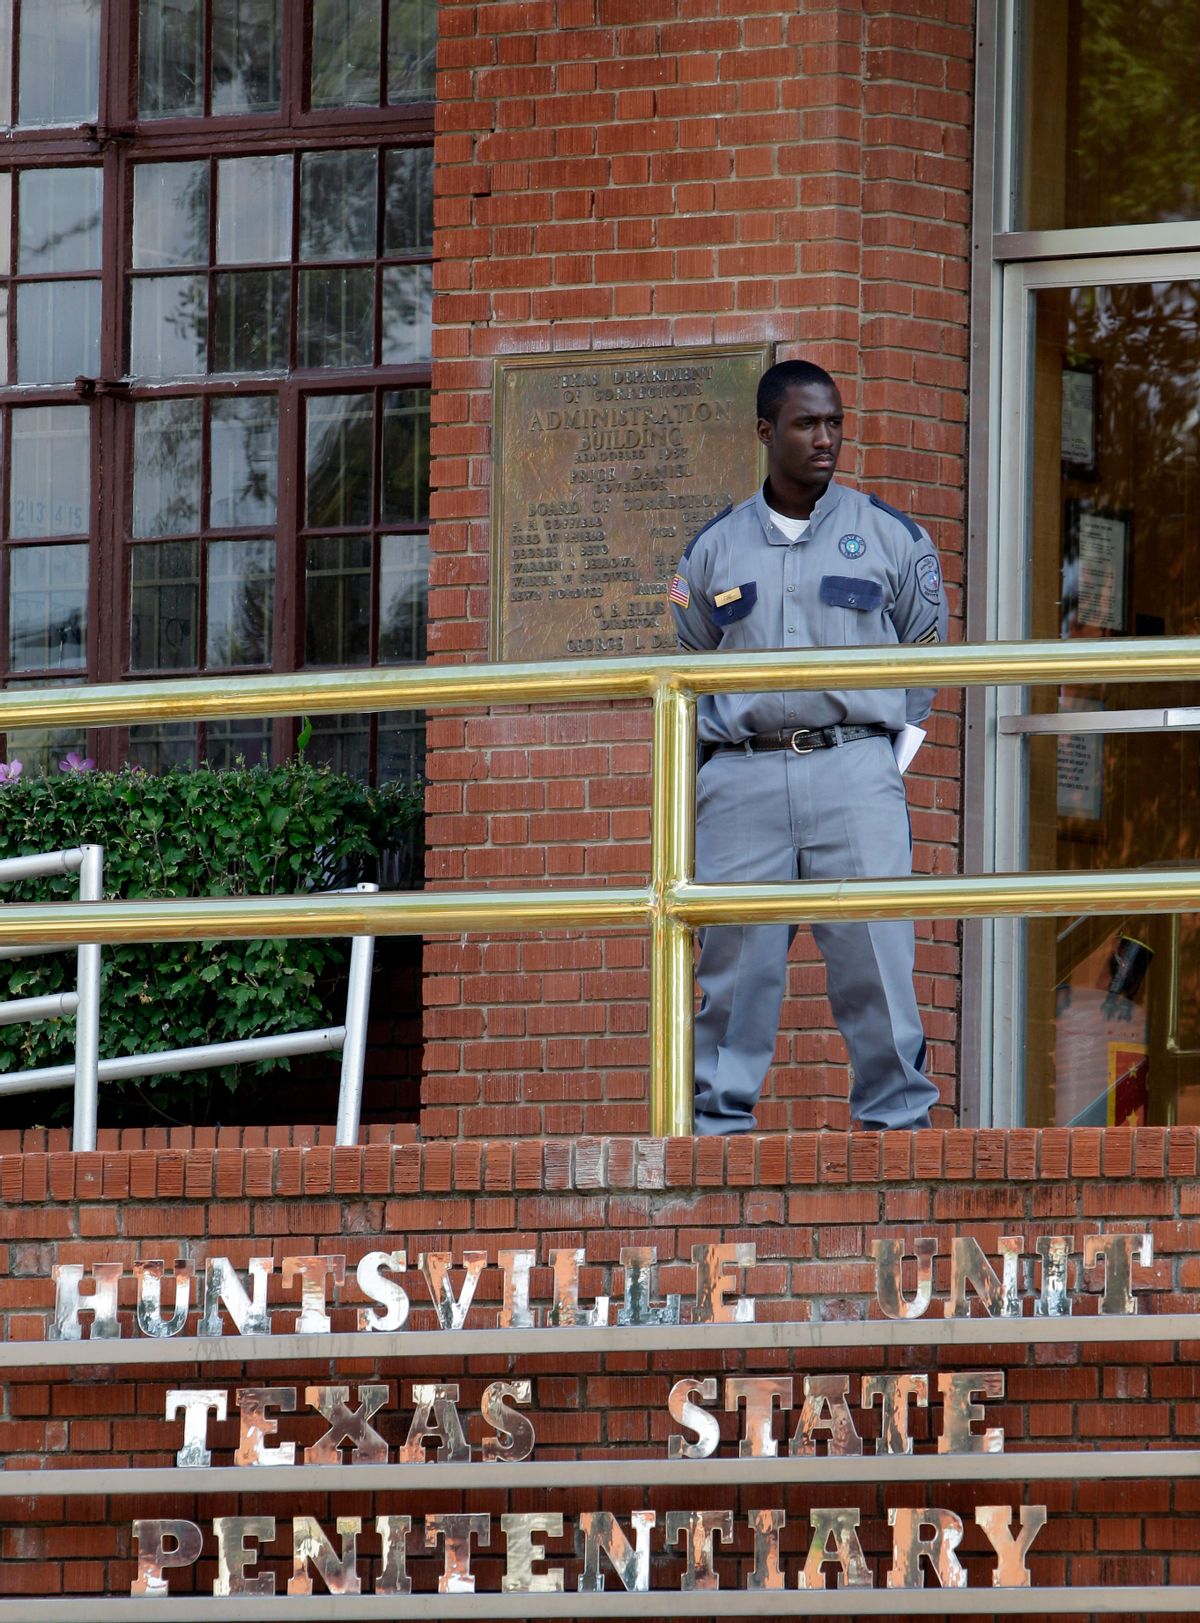 FILE - In this Sept. 21, 2011 file photo, a corrections officer keeps watch outside the Texas Department of Criminal Justice Huntsville Unit in Huntsville, Texas.  ((AP Photo/David J. Phillip, File))